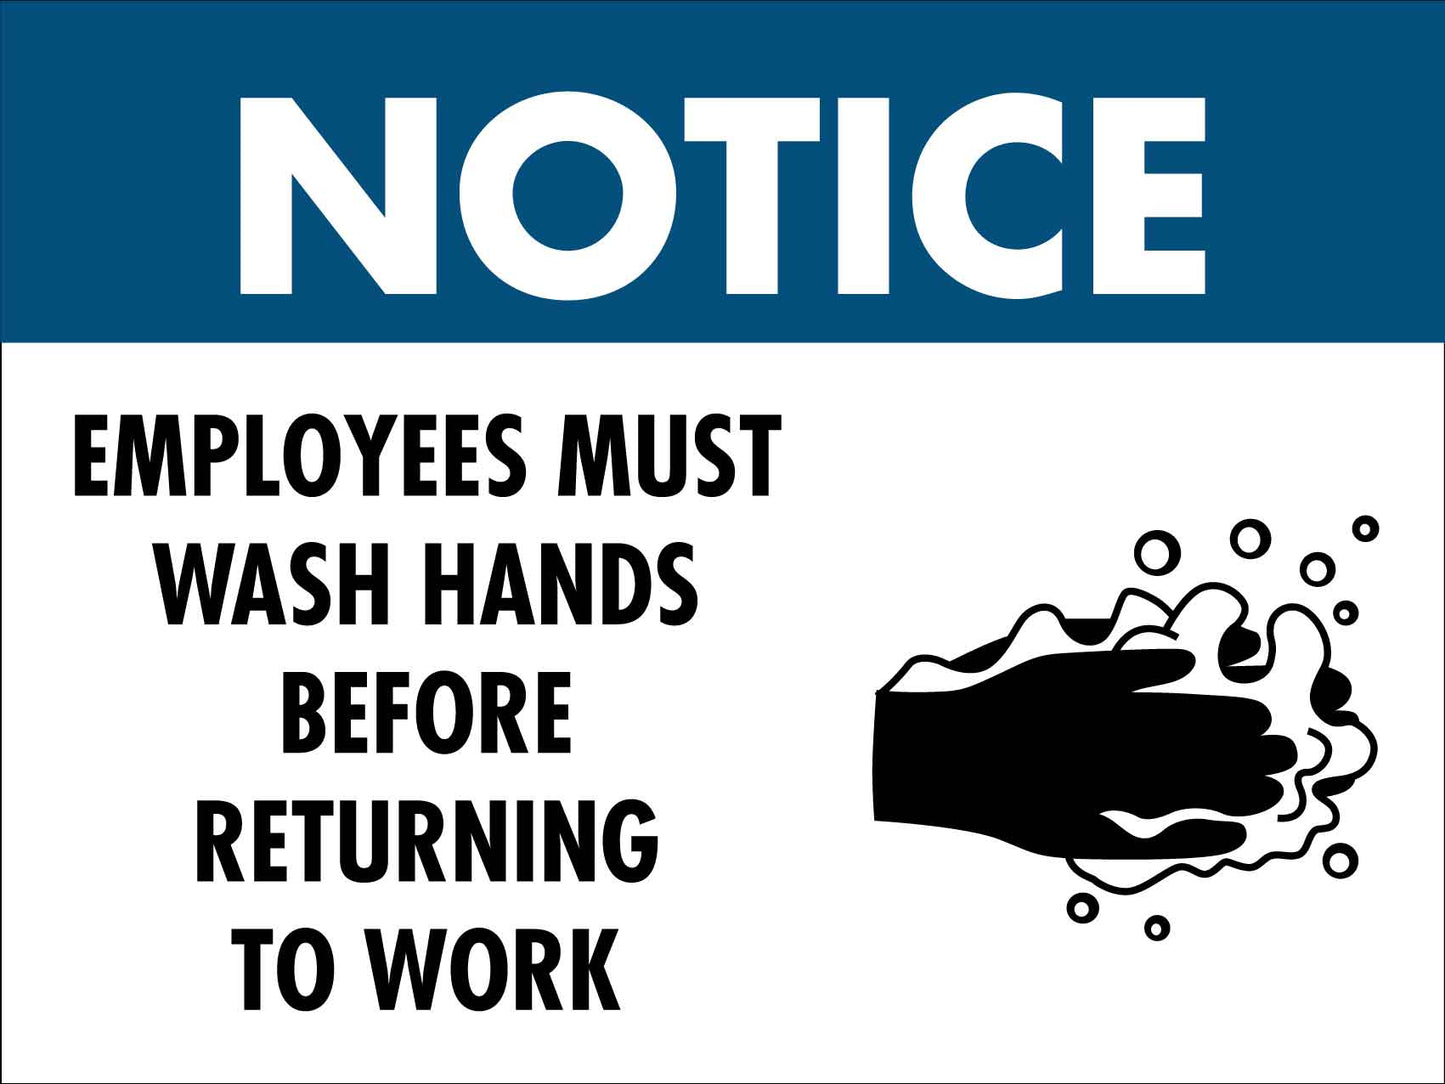 Notice Employees Must Wash Hands Before Returning To Work Sign